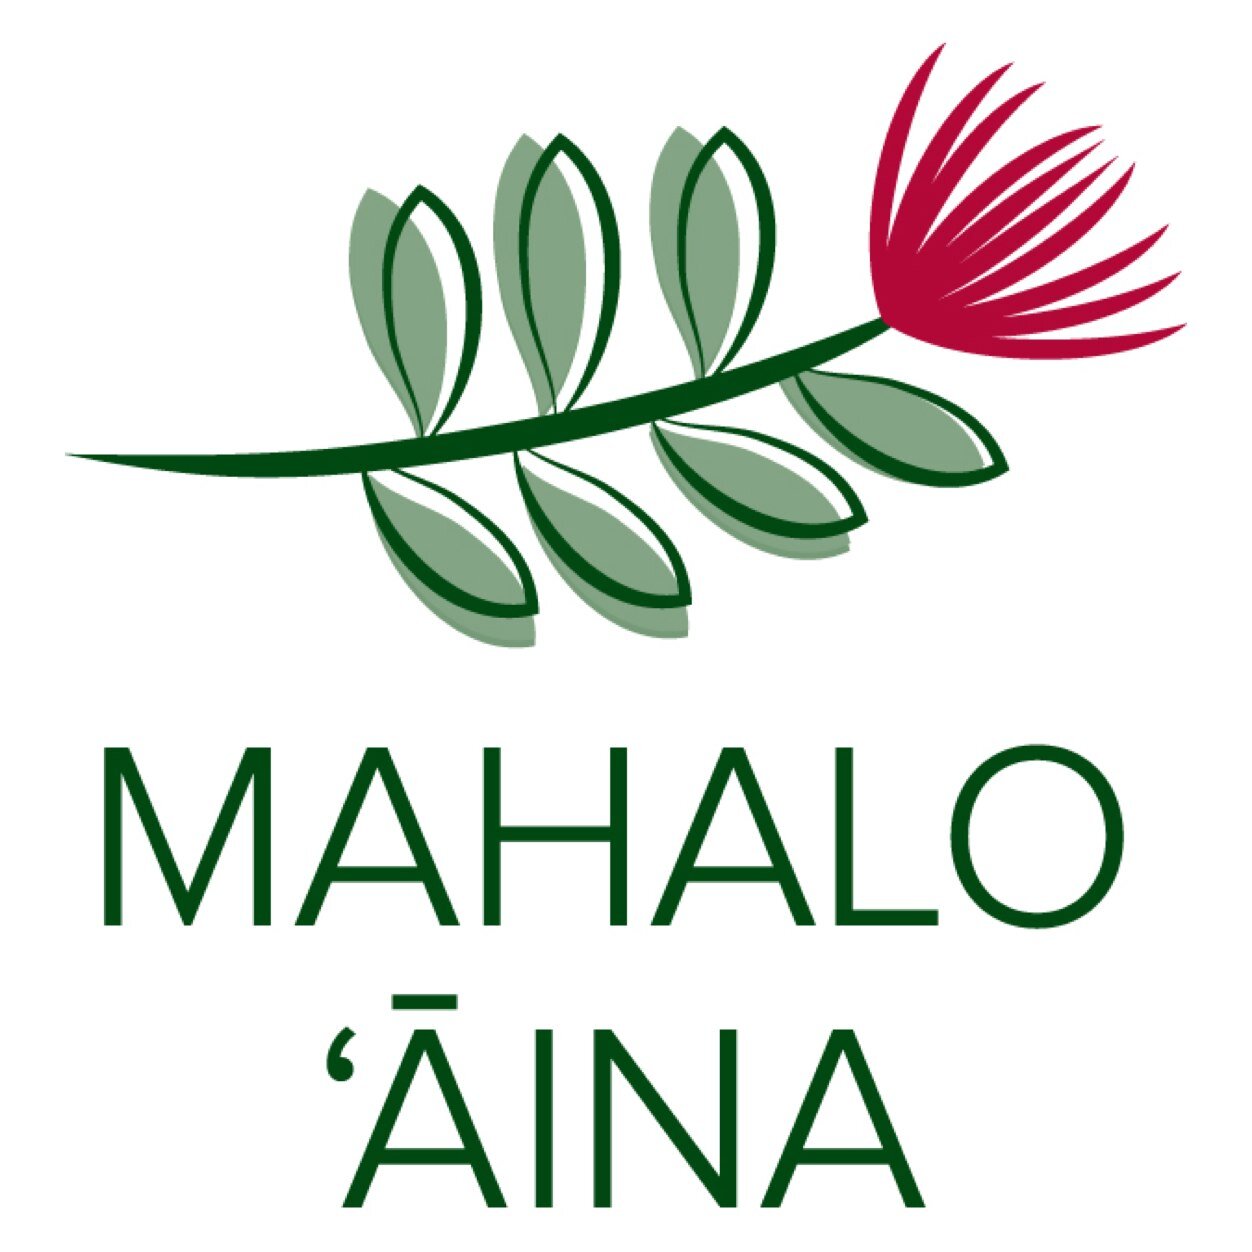 The MAHALO AINA: Give Back to the Forest program seeks to ensure a thriving future for the aina and the people of Hawaii for generations to come.